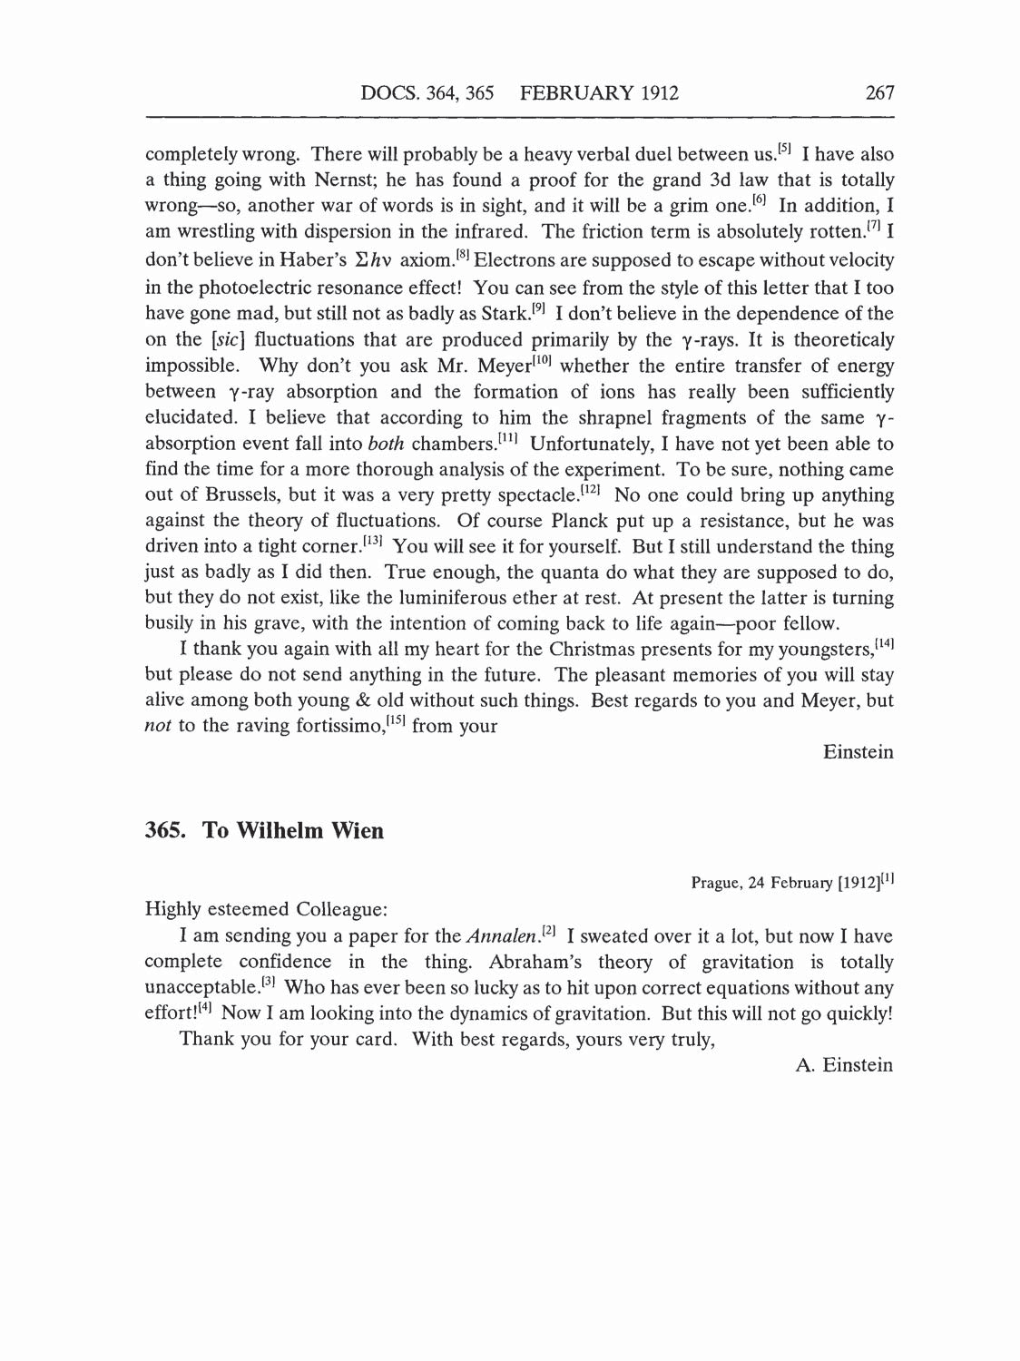 Volume 5: The Swiss Years: Correspondence, 1902-1914 (English translation supplement) page 267